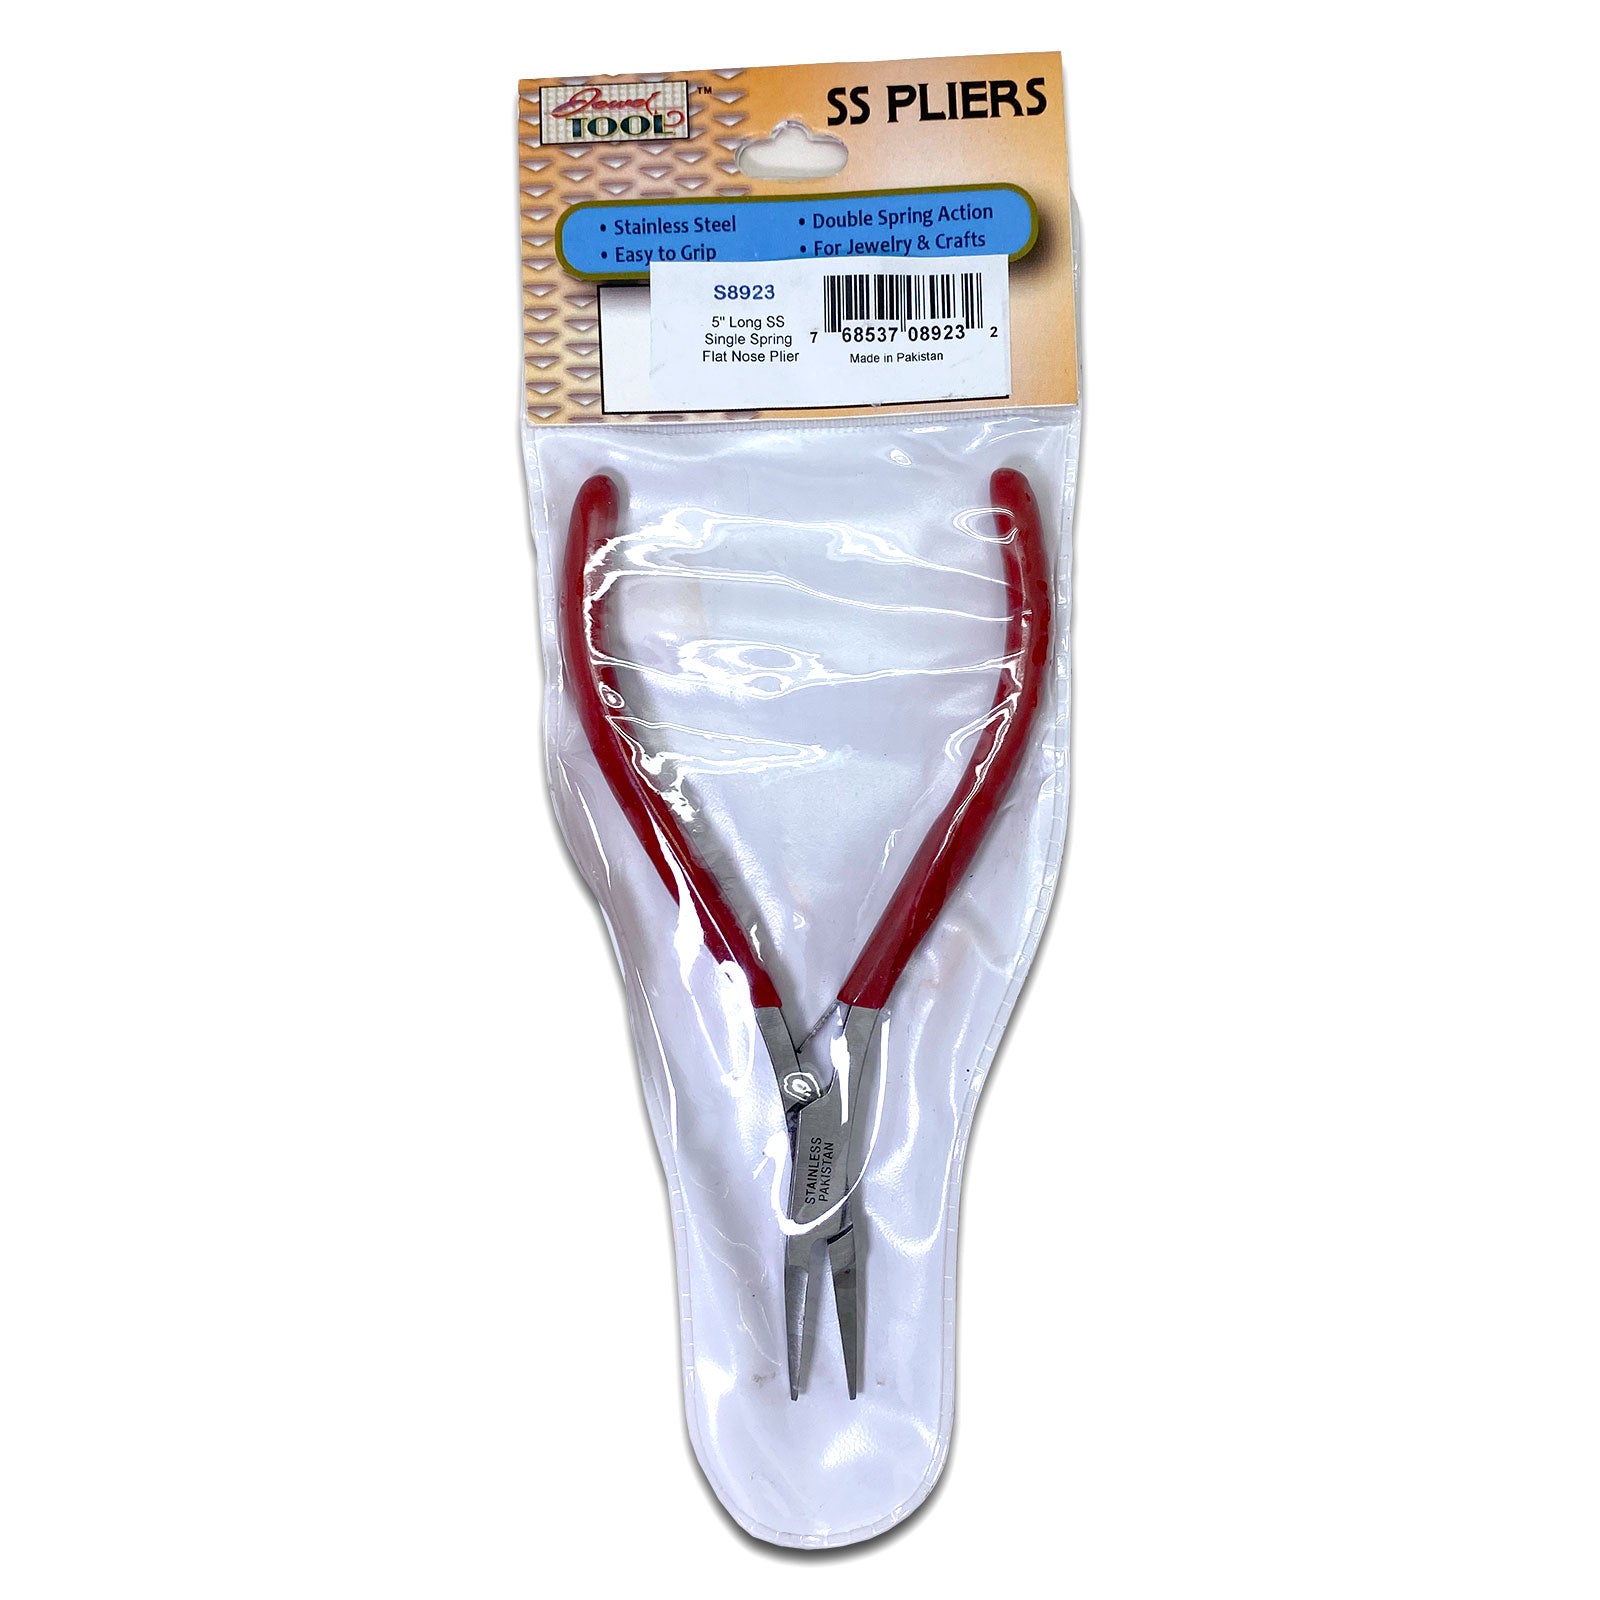 5" Stainless Steel Flat Nose Pliers